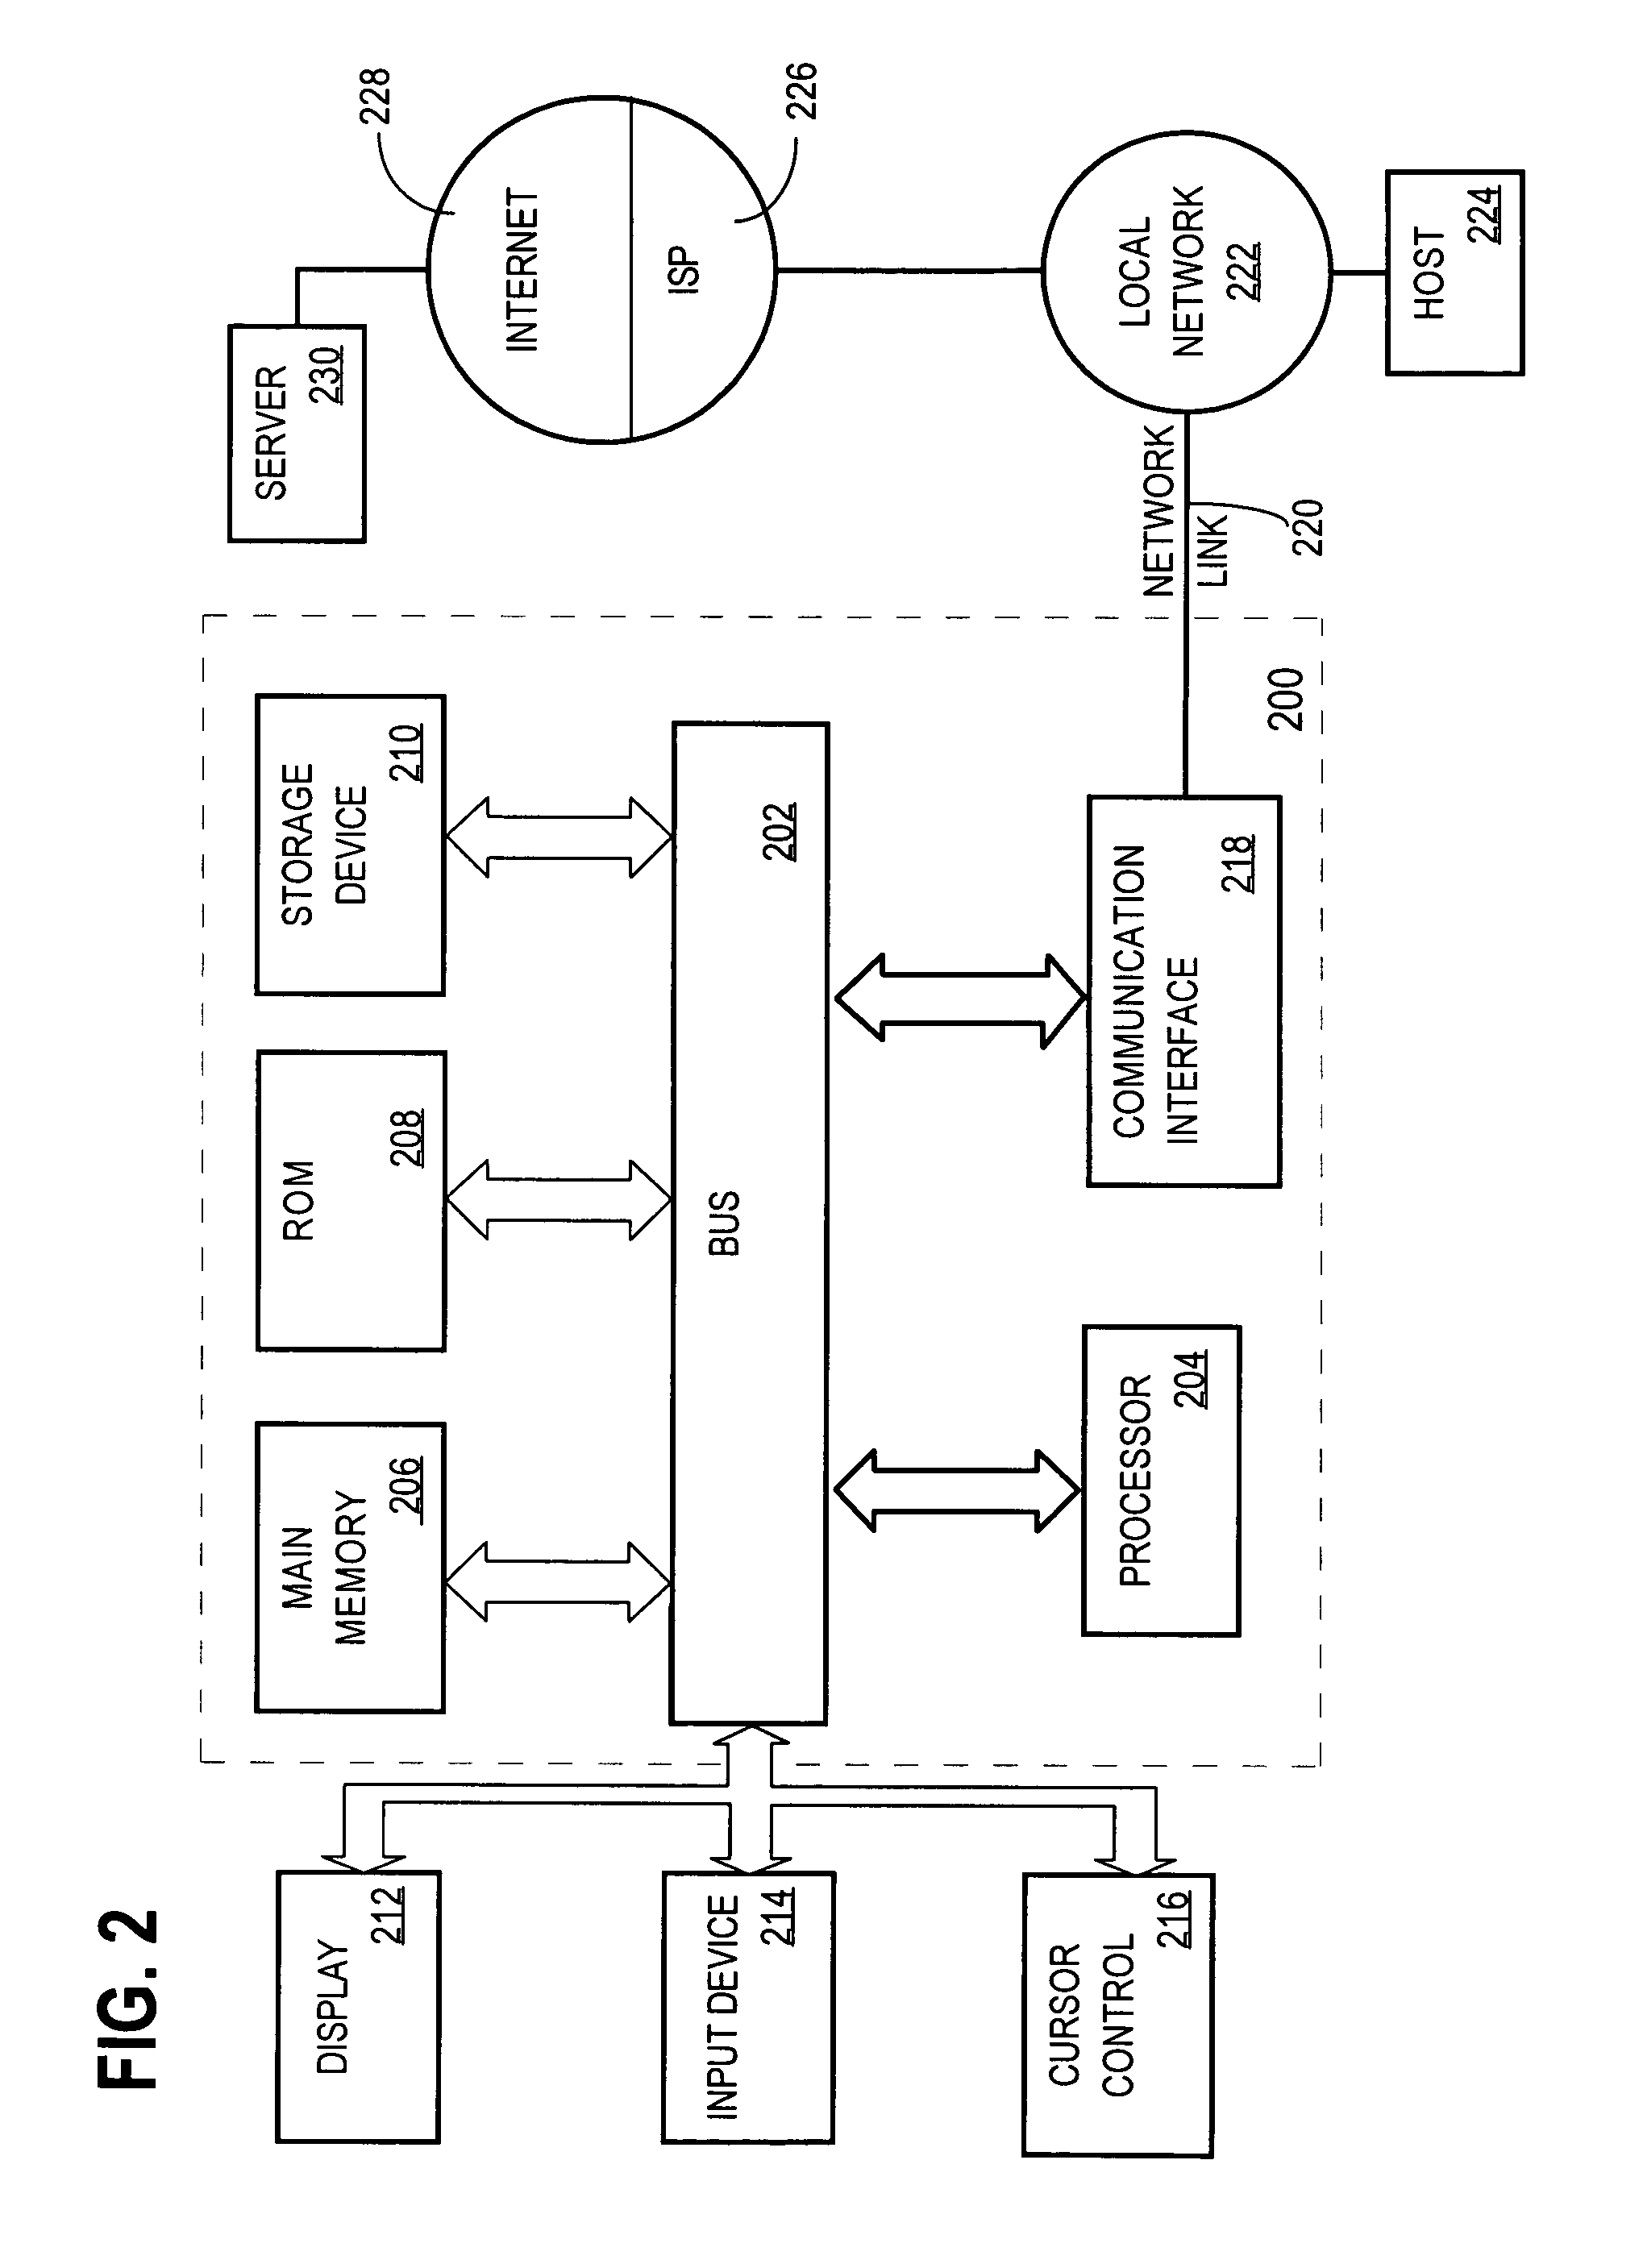 Method of diagnosing and repairing network devices based on scenarios